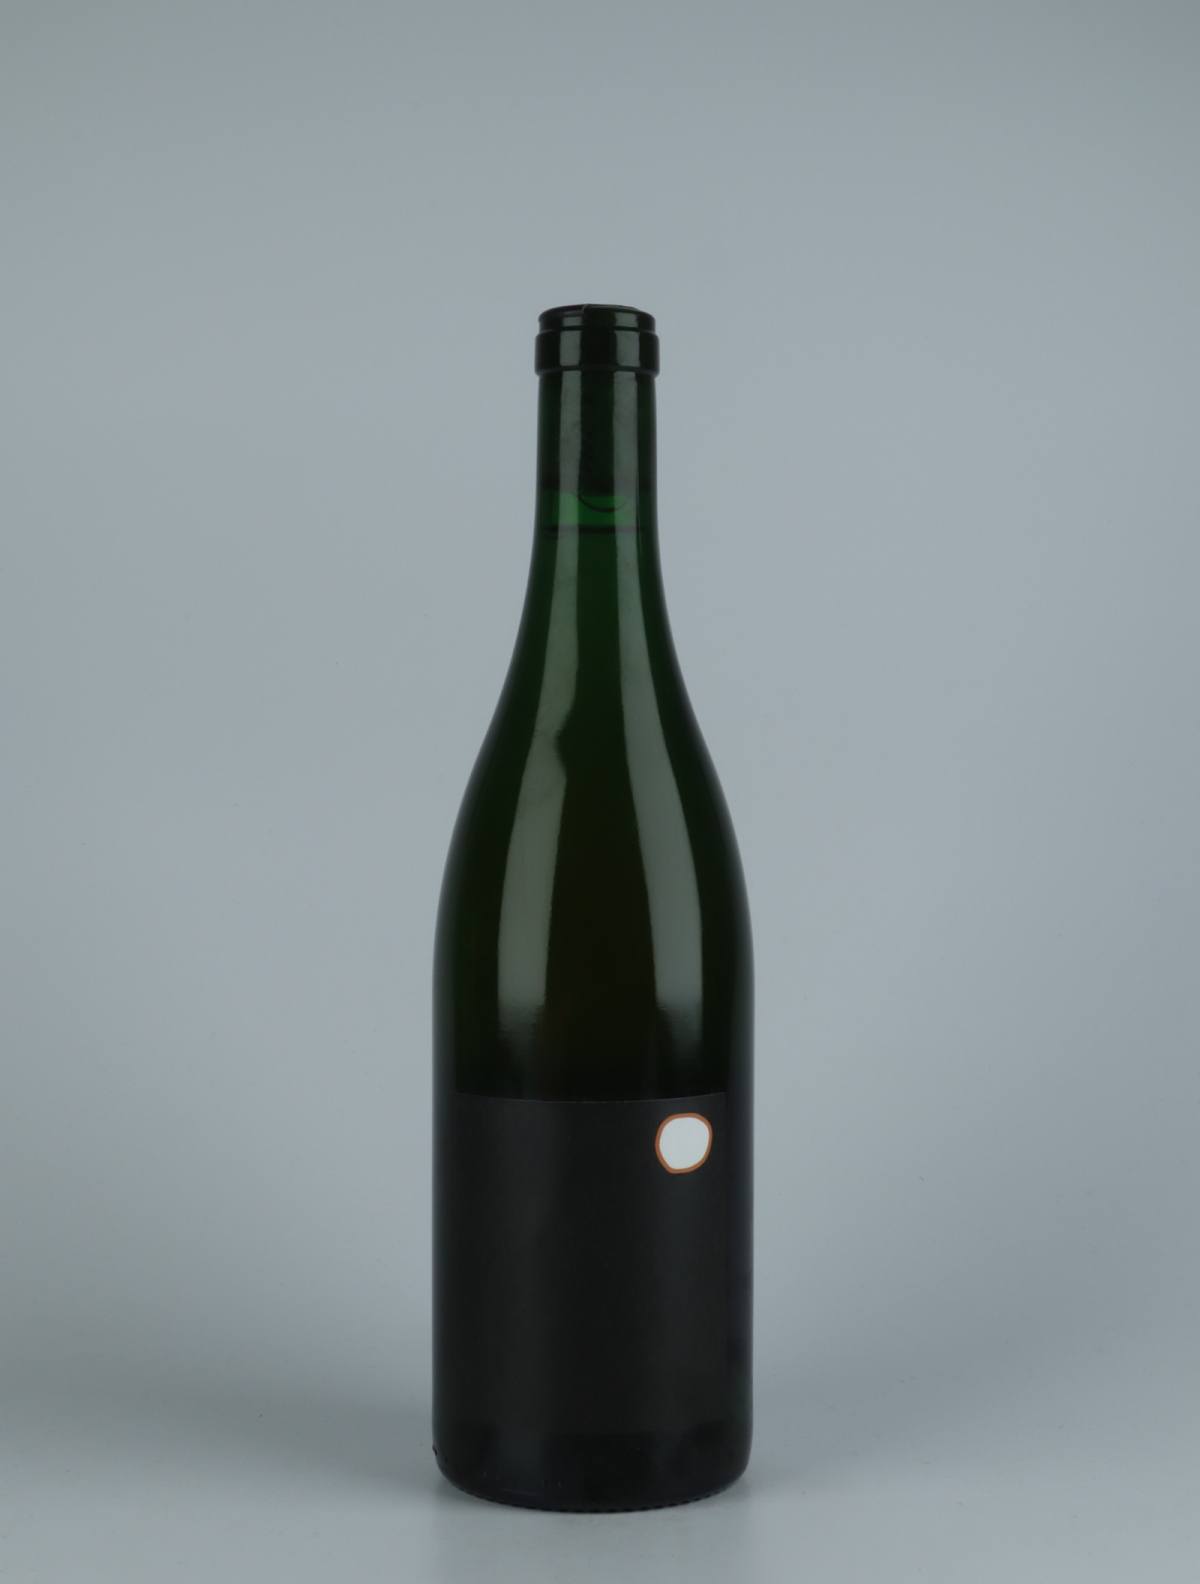 A bottle 2020 Chardonnay Maceration - Anonyme Orange wine from , Beaujolais in France